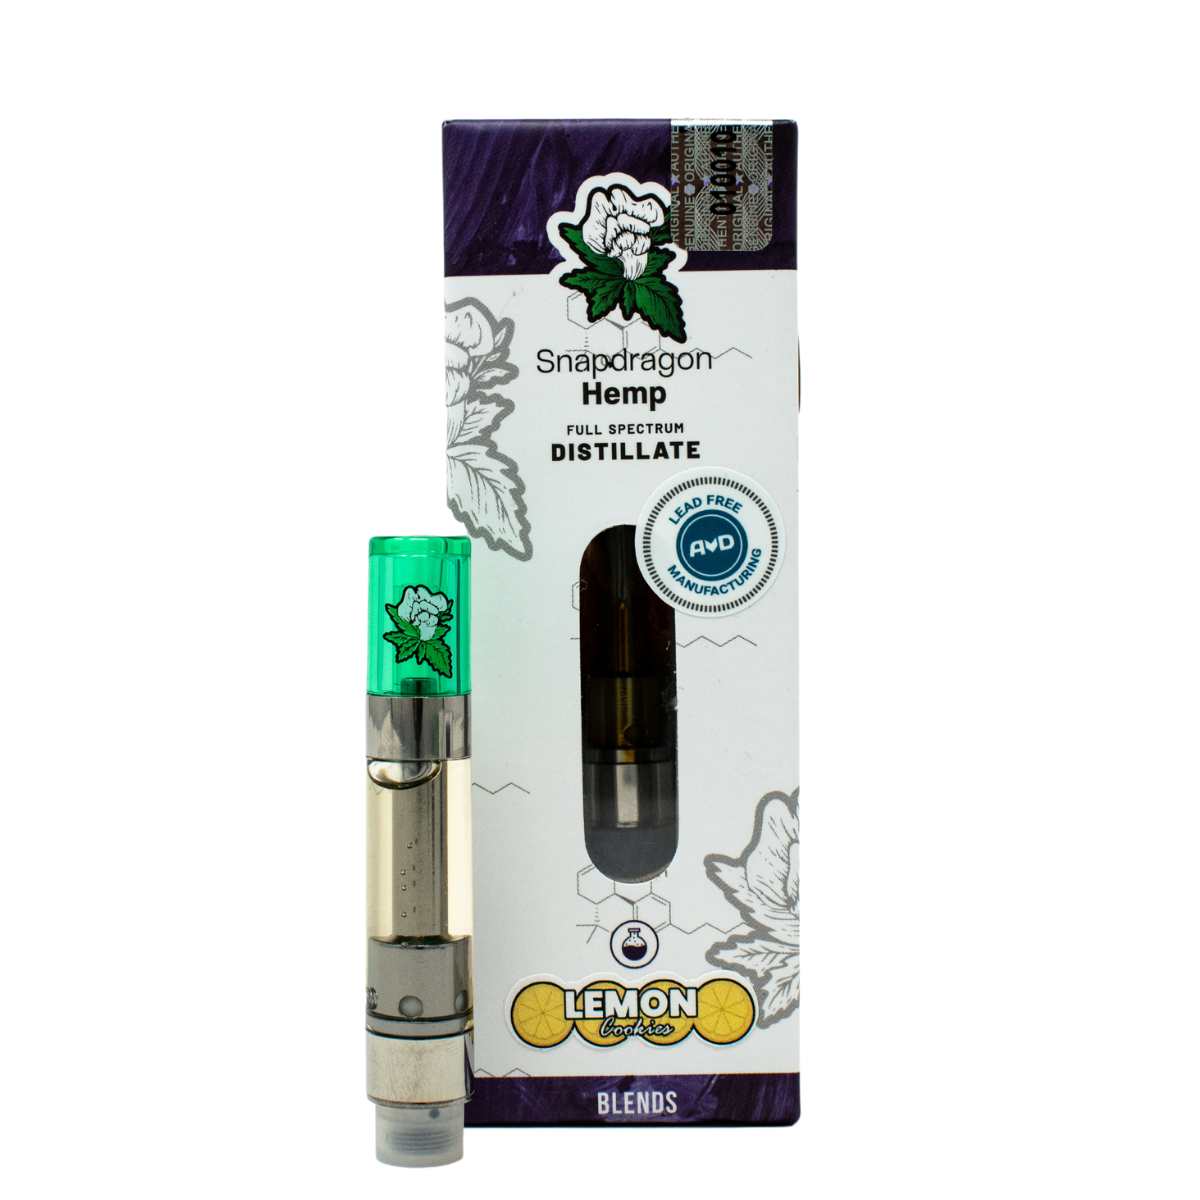 Delta-8 THC and CBN 1ml Vape Cartridge with Live Resin Terpenes 